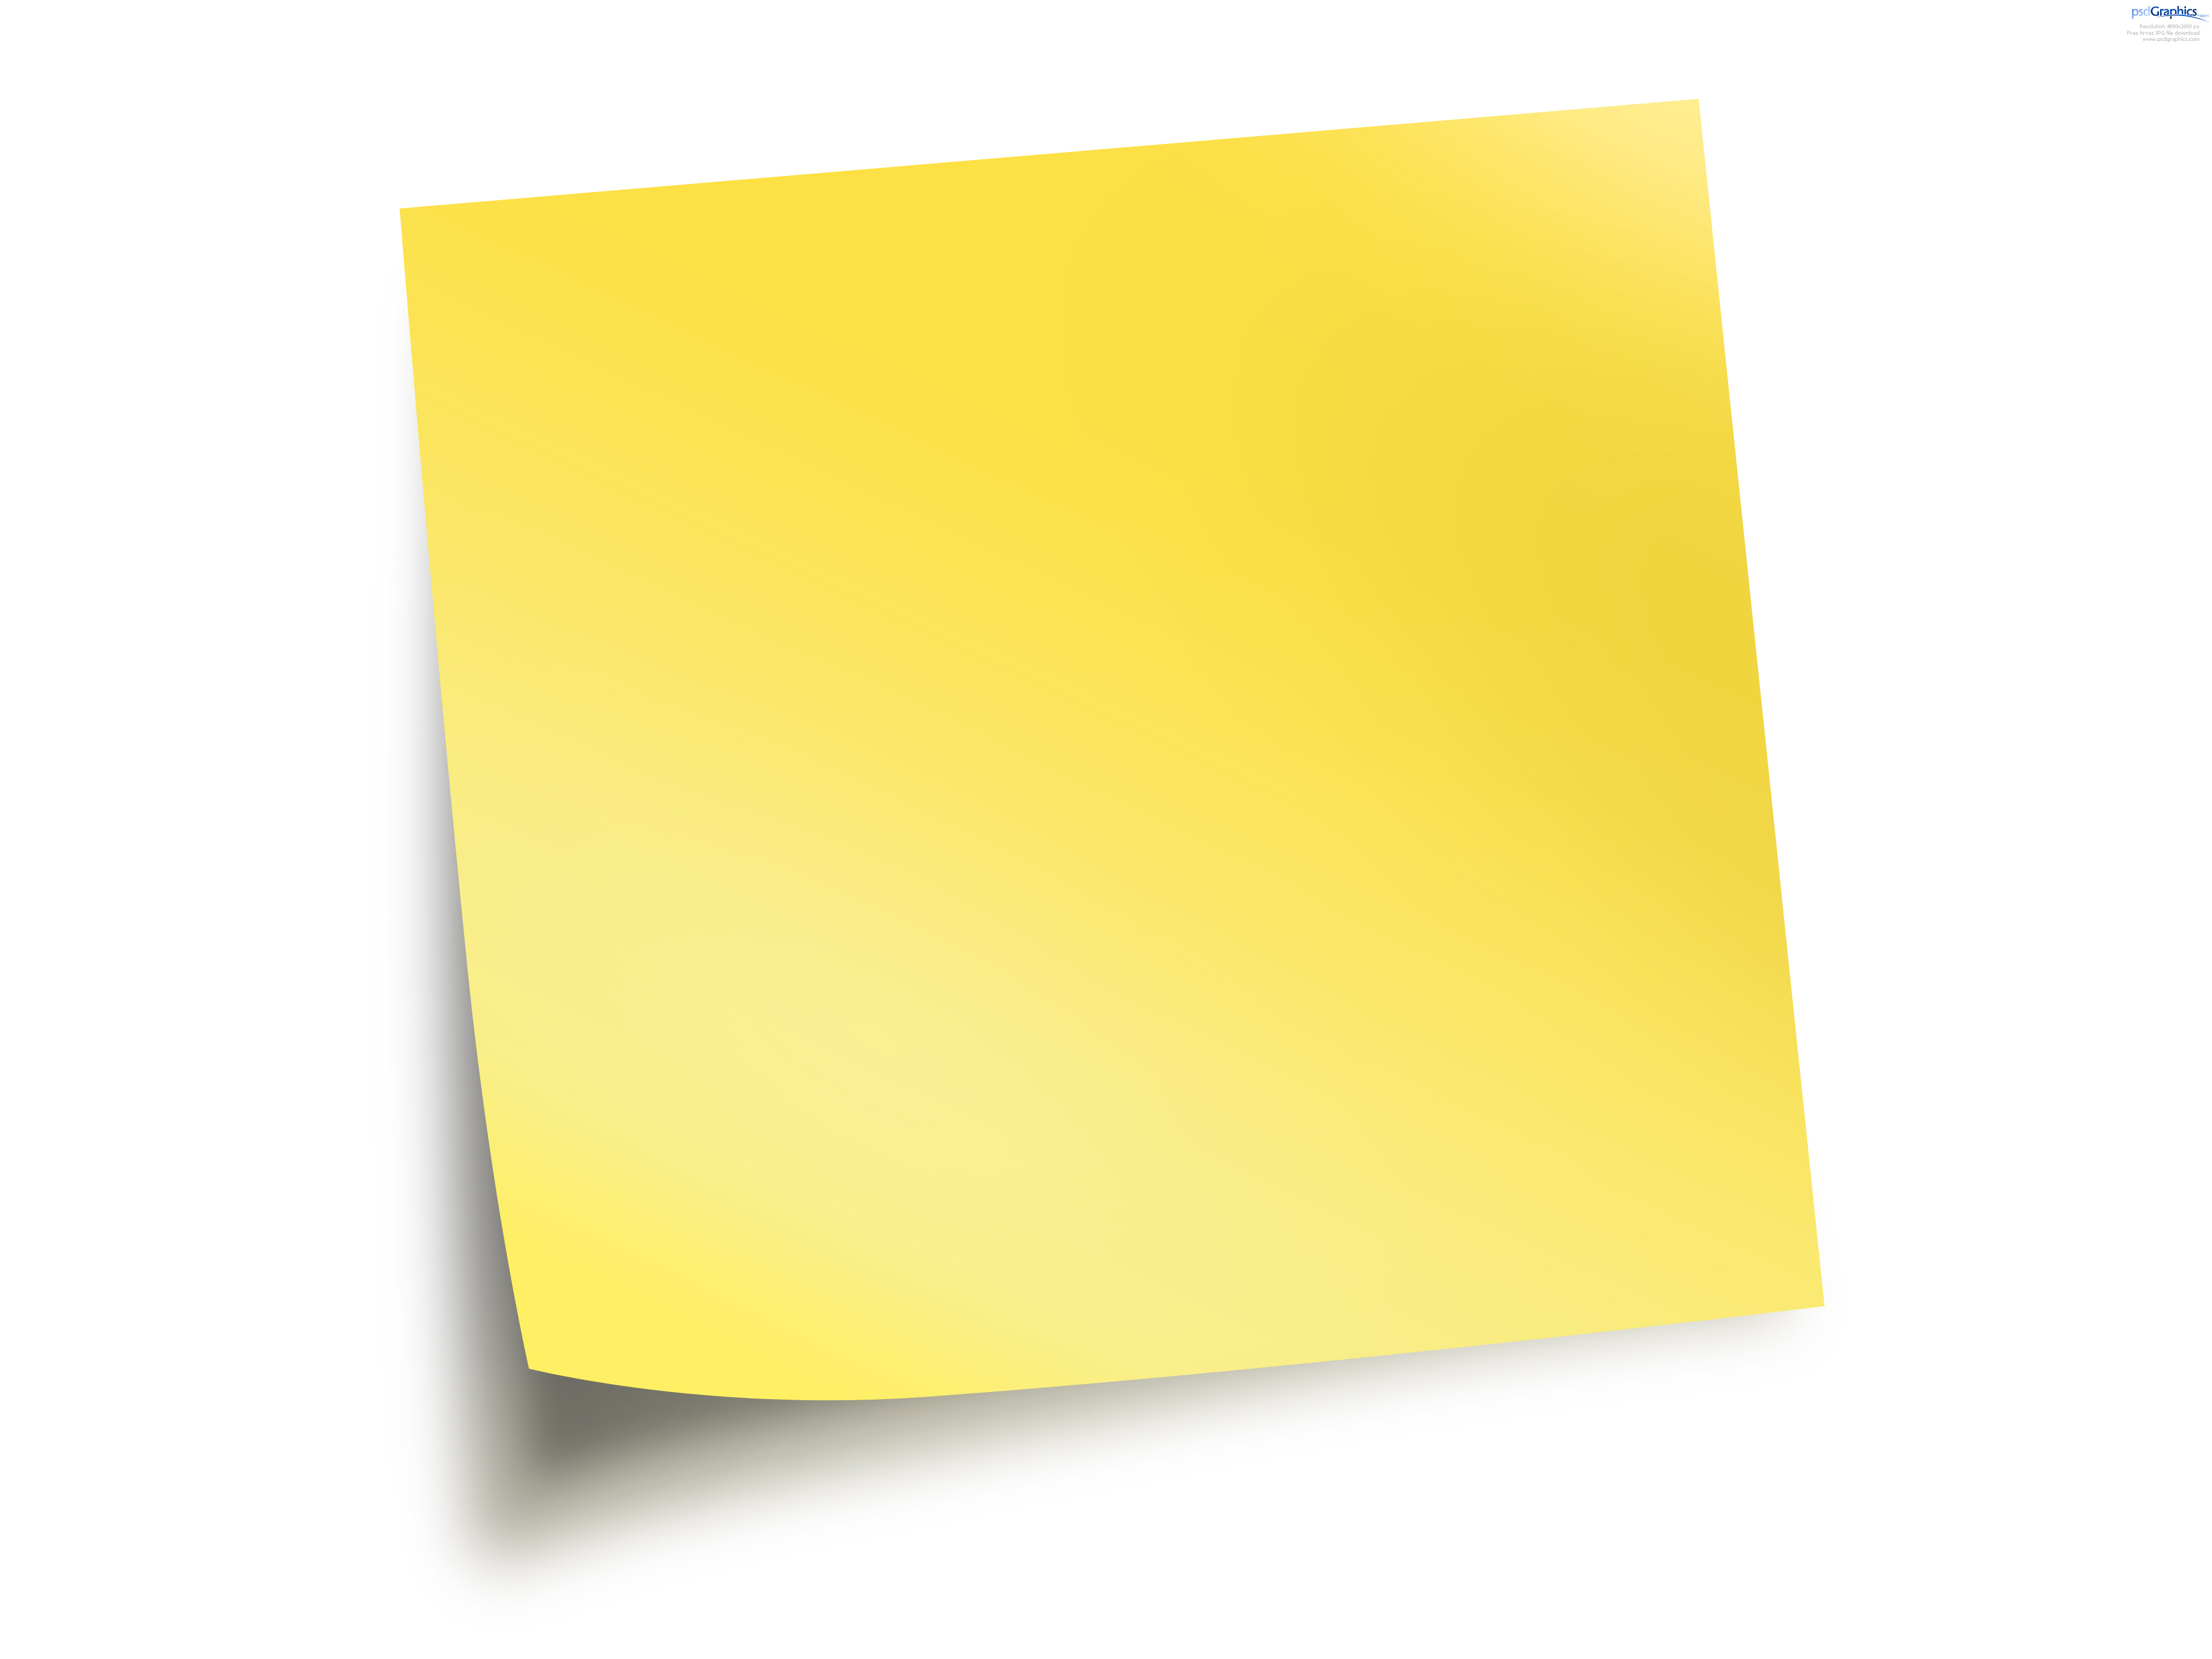 App Icon Sticky Notes Turn Your Whole World Into iOS